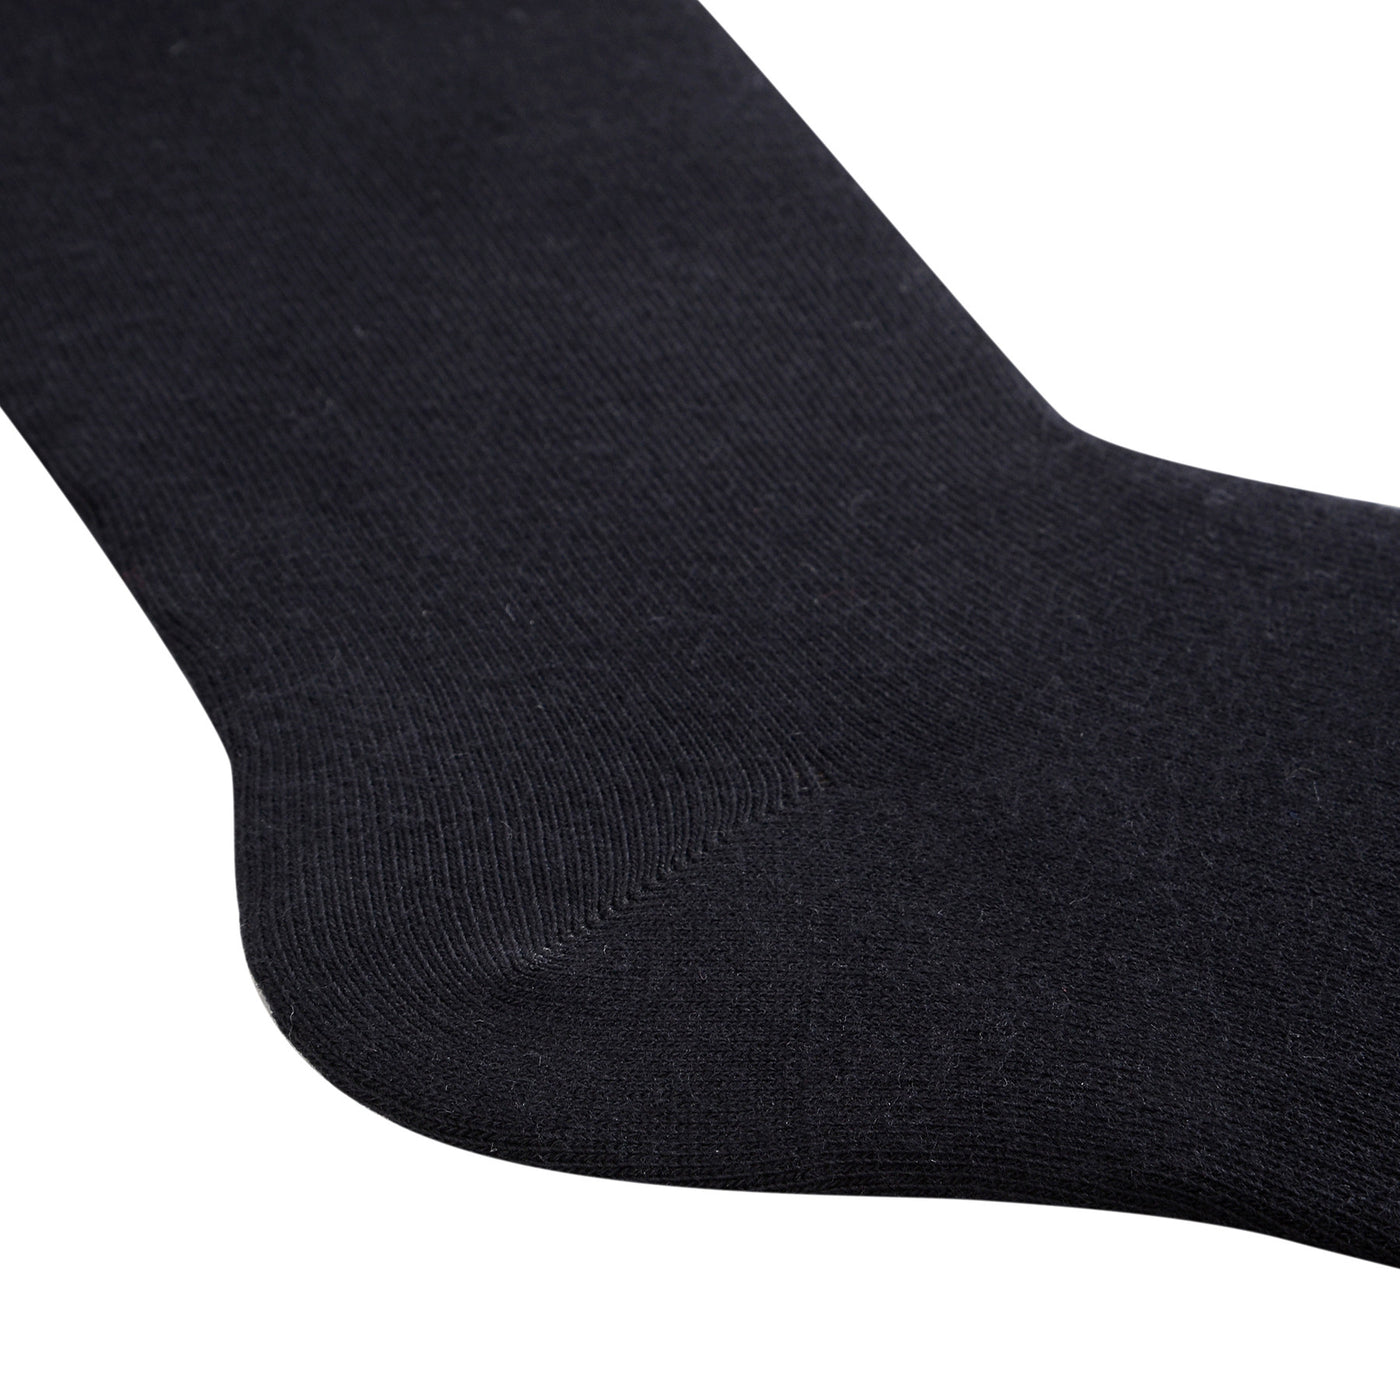 4 Pairs High Quality Finest Combed Cotton Dress Socks, Black, Gift Set